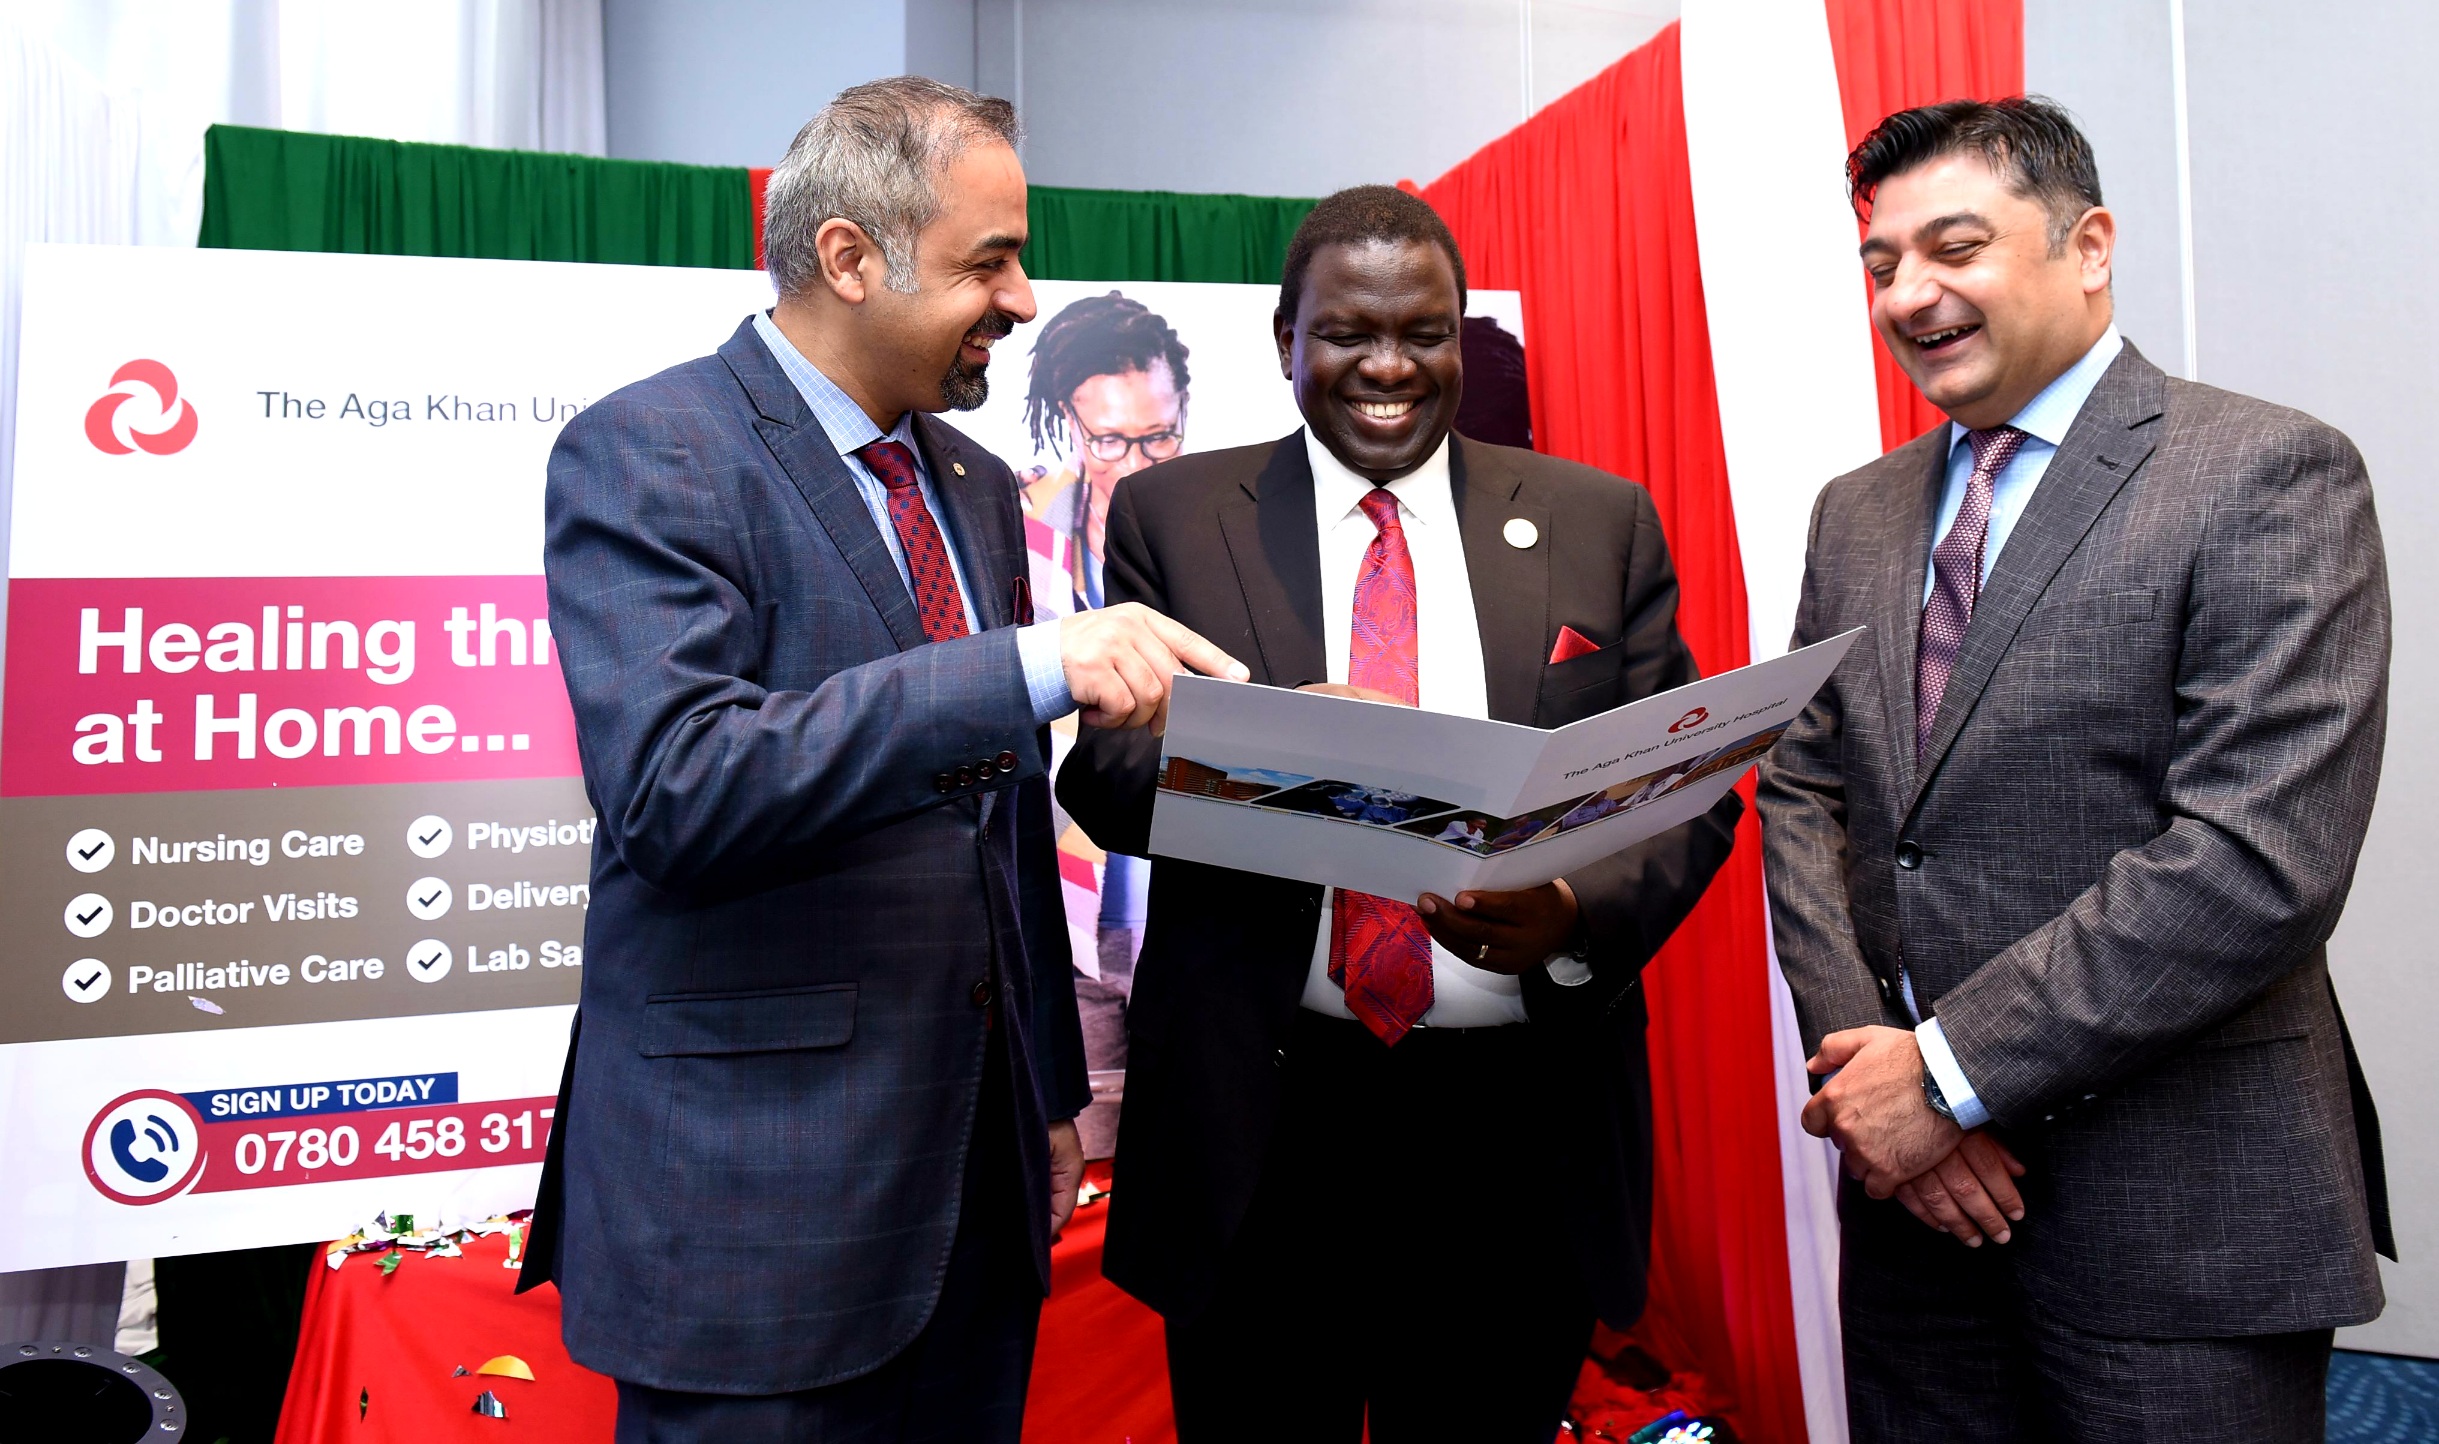 Aga Khan University Hospital Chief Operating Officer Khurram Jamal, Jubilee Holdings Limited Group CEO Dr. Julius Kipng’etich and Aga Khan University Hospital CEO Rashid Khalani share a light moment during the hospital’s Home Care Services launch. The service will see that patients access crucial medical services such as chemotherapy, nursing care, collection of lab samples among others in the comfort of their homes.